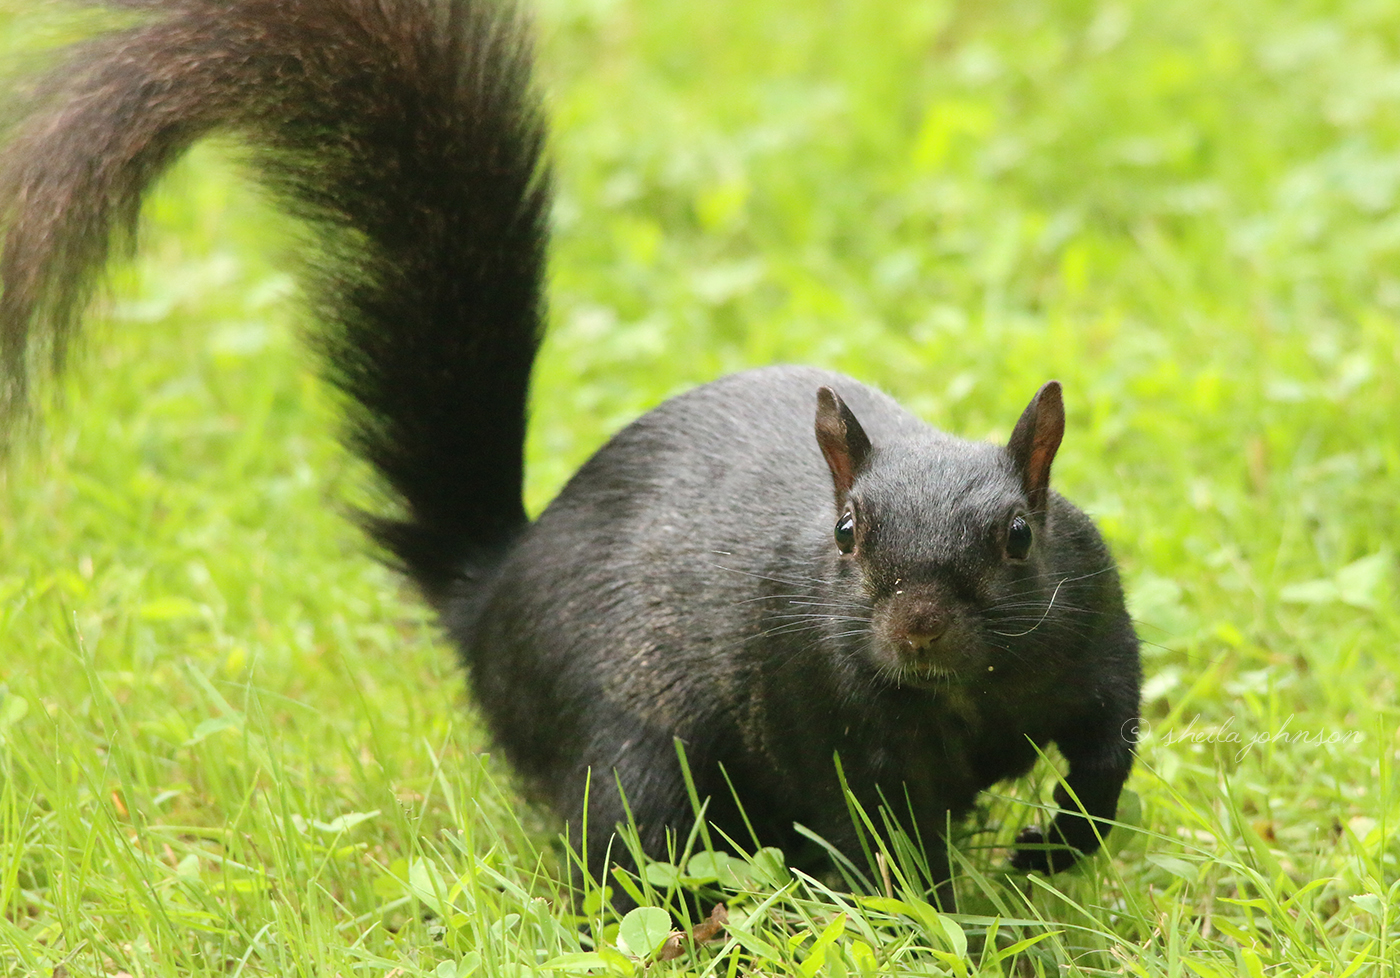 This Little Black Squirrel Is So Darned Chipper, And That Wiry Whisker In The Wind Adds To His Charm. Black Squirrels Are A Melanistic Variation Of The The More Common Gray Squirrel.